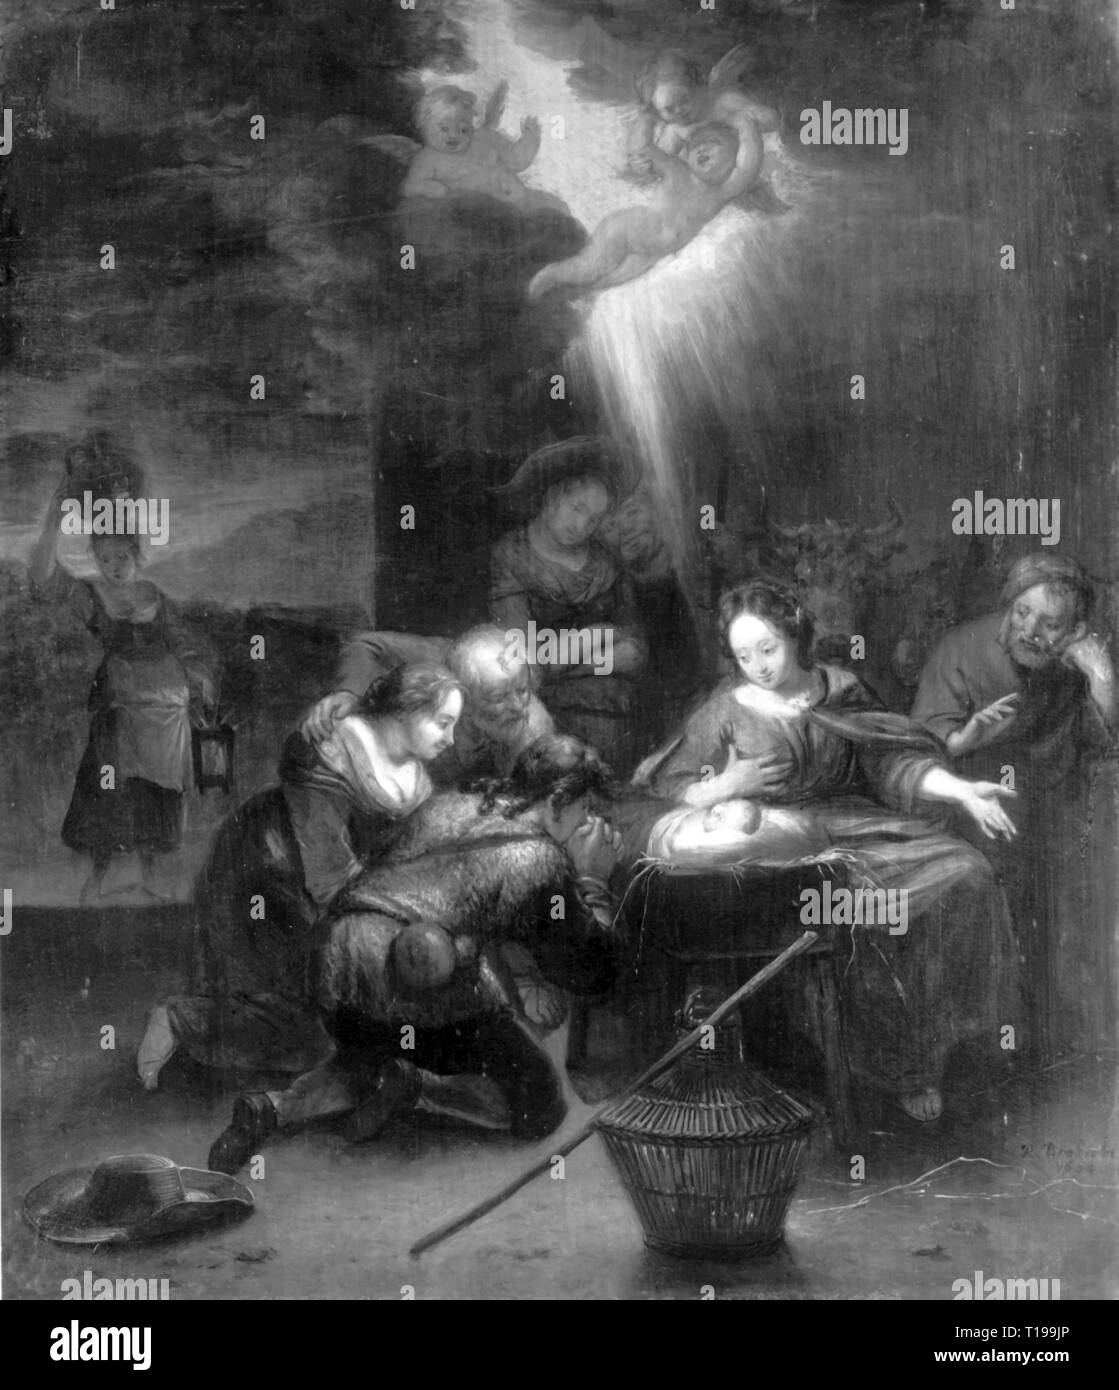 religion, Christianity, Jesus Christ, nativity, 'Adoration of the Shepherds', painting by Richard Brakenburgh (1650 - 1702), 17th century, old pinacotheca, Munich, baroque, fine arts, religious art, art of painting, Messiah, Saviour, Redeemer, half-length, half length, Mary, Madonna, the infant Jesus, baby Jesus, divine infant, baby, babies, child, children, kid, kids, Joseph, shepherd, shepherds, kneel, kneeling, adoration, worships, adoring, adore, worshiping, worship, angel, angels, light, lights, religion, religions, nativity, nativities, herdsman,, Artist's Copyright has not to be cleared Stock Photo